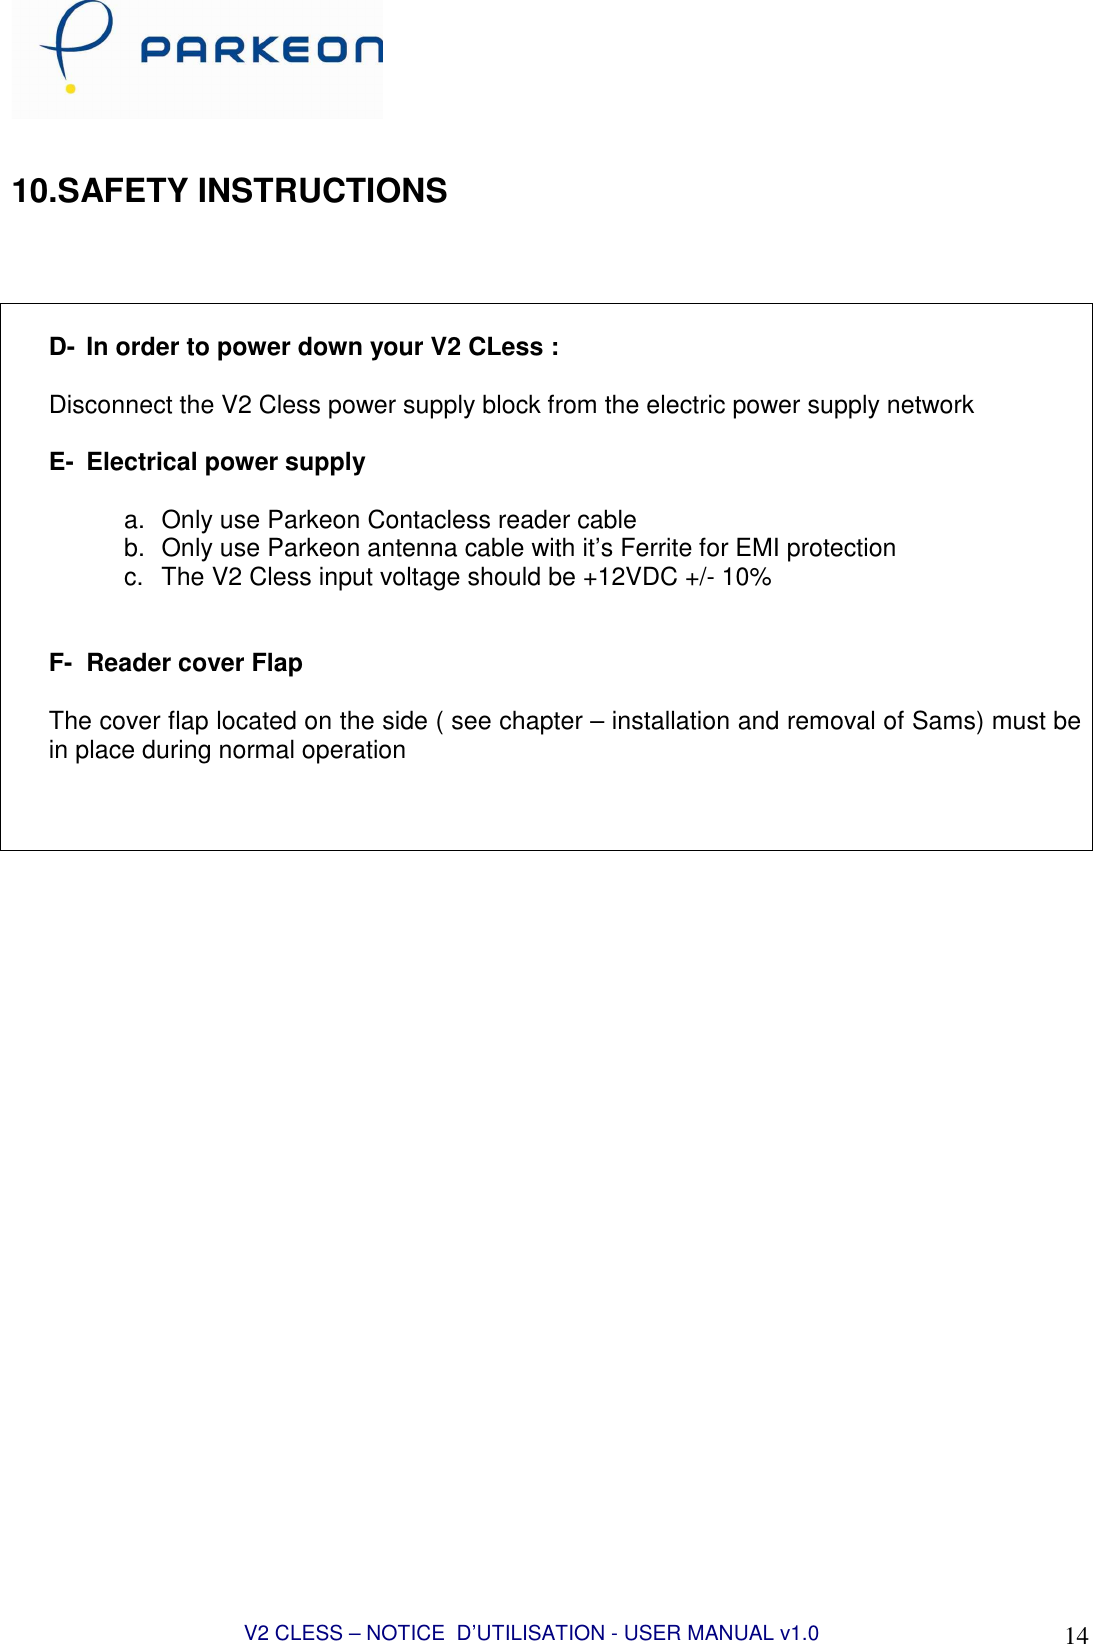  V2 CLESS – NOTICE  D’UTILISATION - USER MANUAL v1.0 14  10.SAFETY INSTRUCTIONS     D-  In order to power down your V2 CLess :  Disconnect the V2 Cless power supply block from the electric power supply network  E-  Electrical power supply  a.  Only use Parkeon Contacless reader cable b.  Only use Parkeon antenna cable with it’s Ferrite for EMI protection c.  The V2 Cless input voltage should be +12VDC +/- 10%   F-  Reader cover Flap  The cover flap located on the side ( see chapter – installation and removal of Sams) must be in place during normal operation     